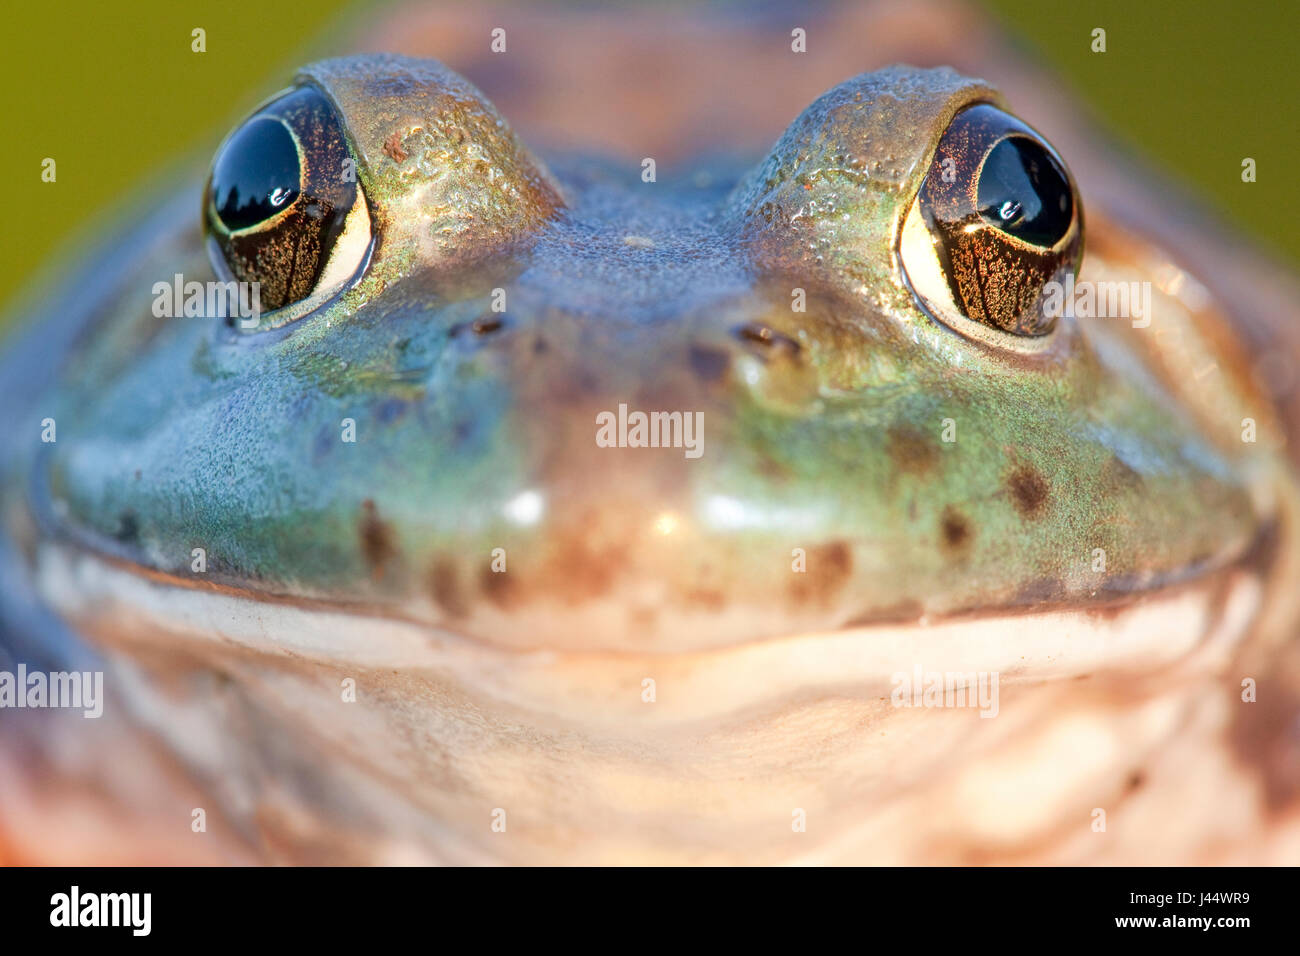 frontal portret of a North American Bullfrog Stock Photo